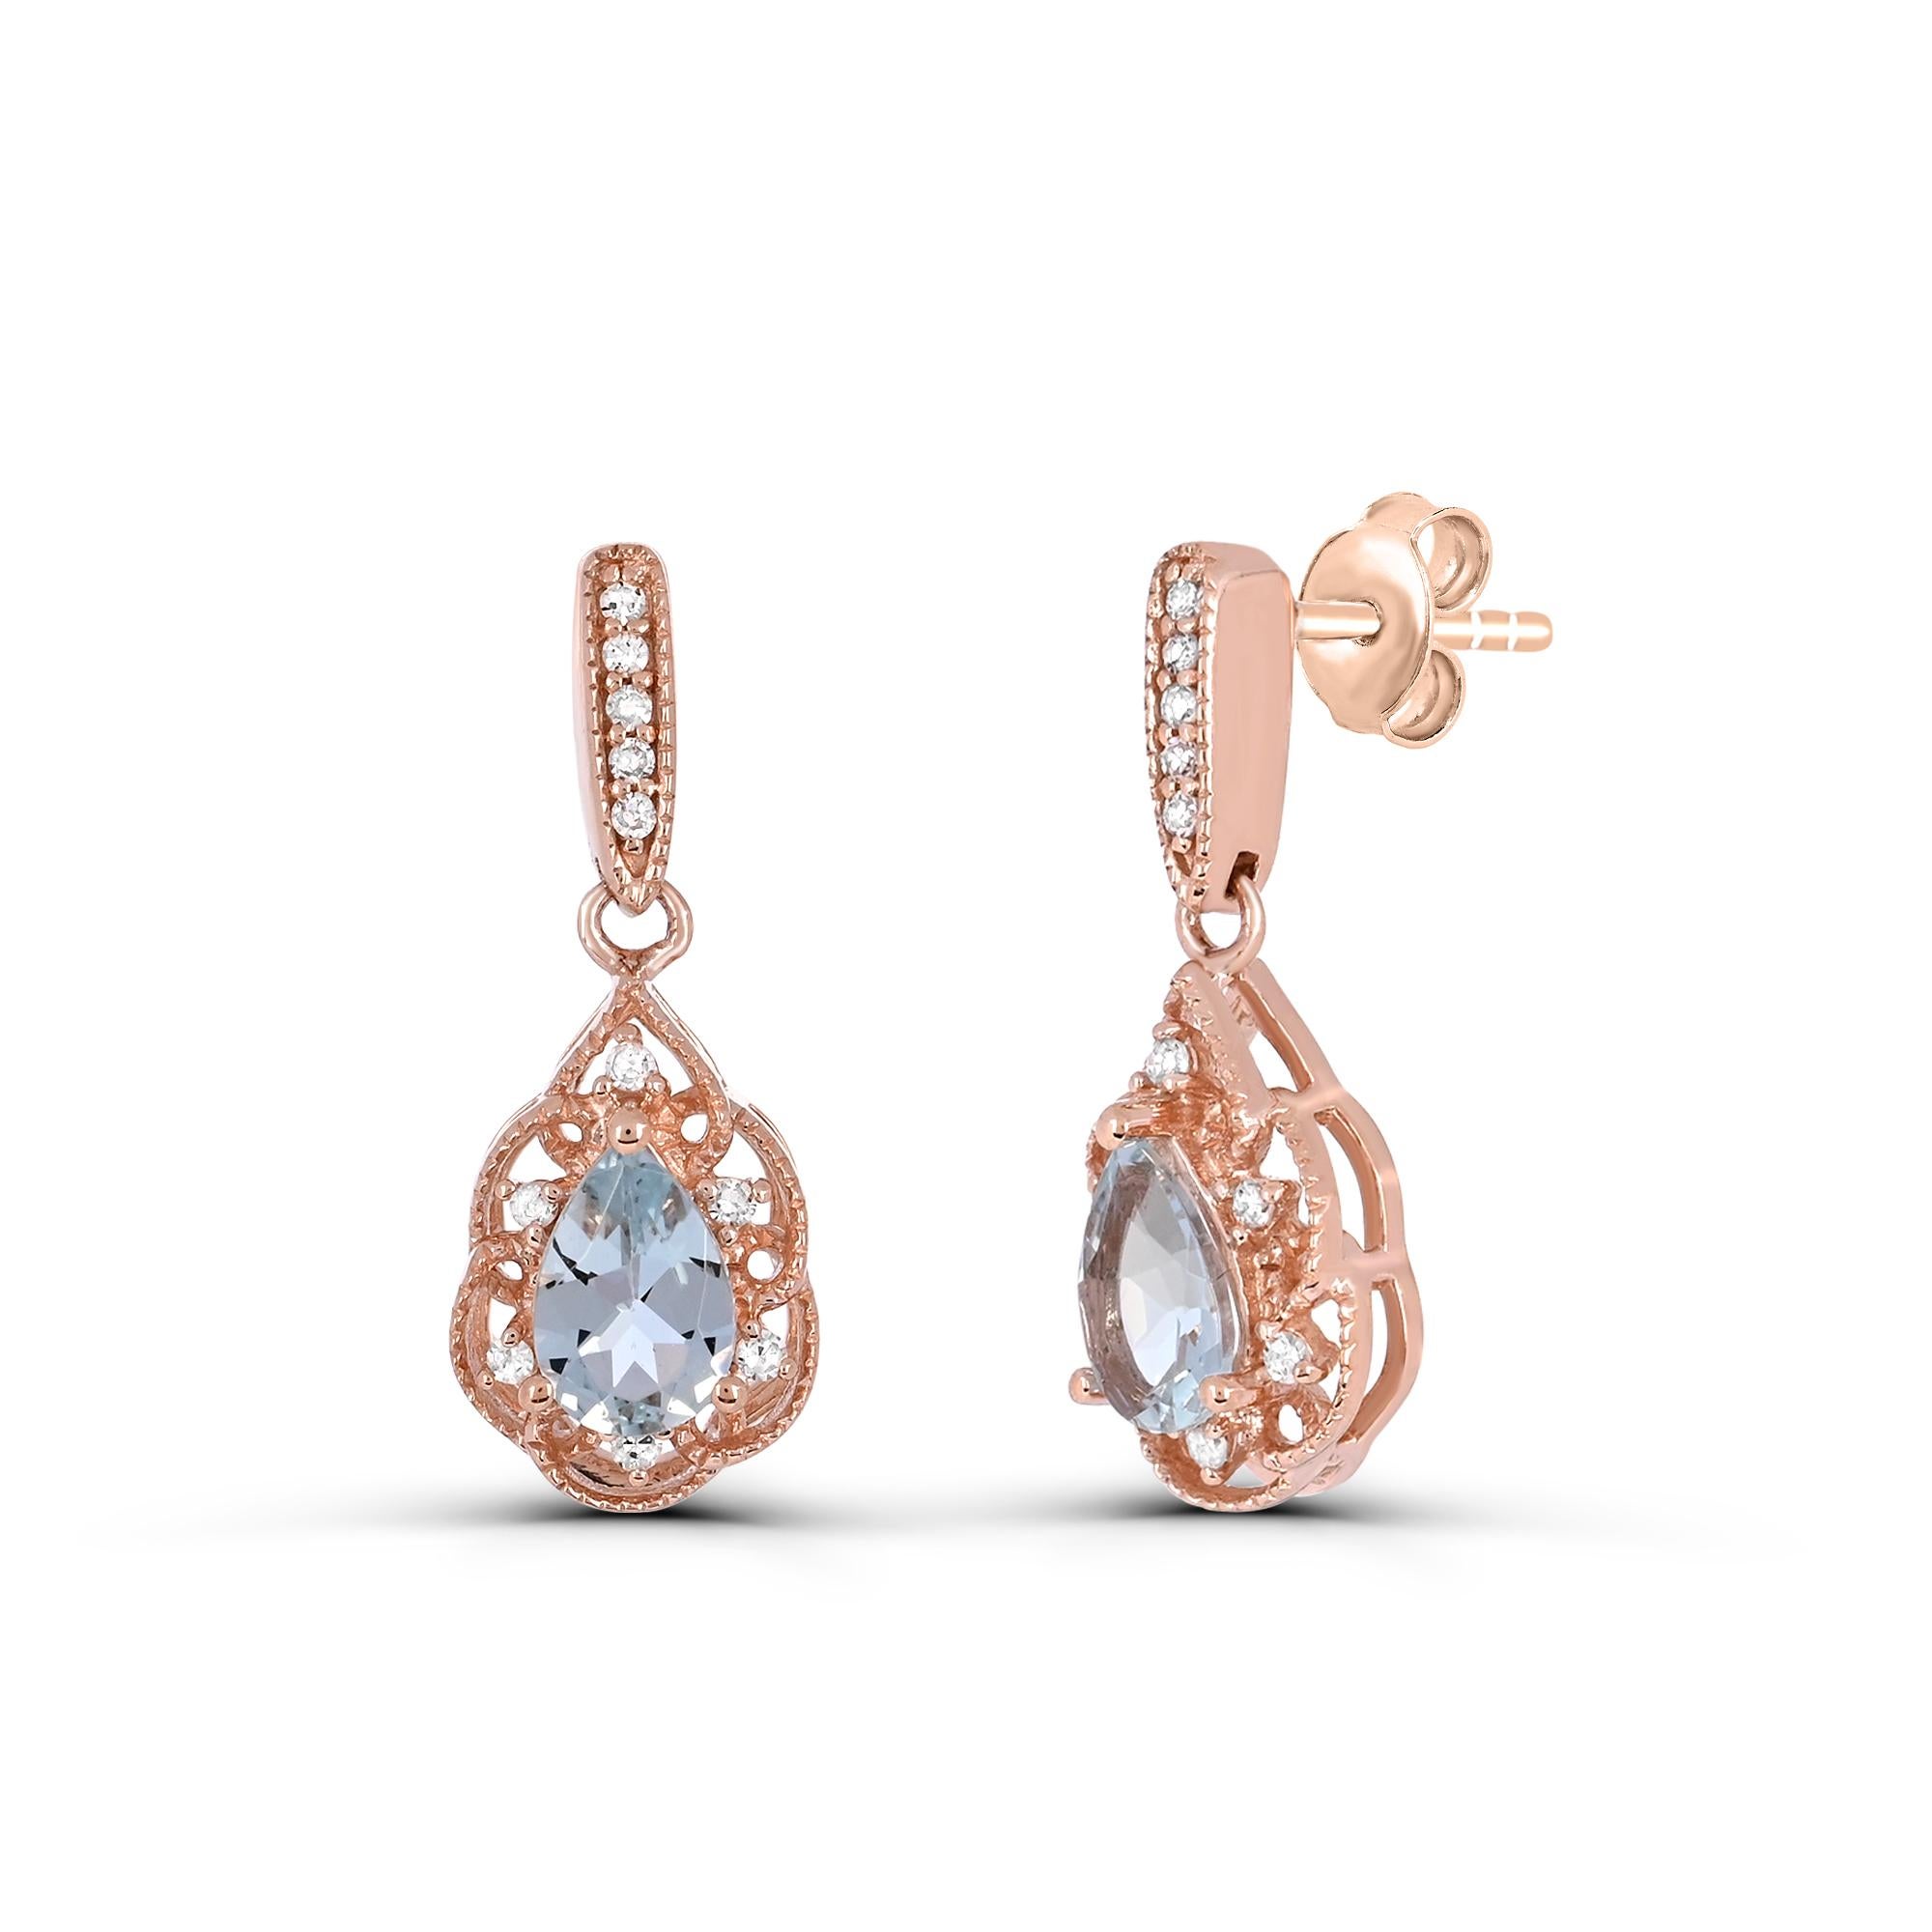 Indulge in elegance with our Pear-Cut Aquamarine and A-Quality Round Diamond Accent Earrings in 14K Rose Gold. Crafted with exquisite attention to detail, each dangle earring features a stunning pear-shaped aquamarine gemstone set in lustrous 14K